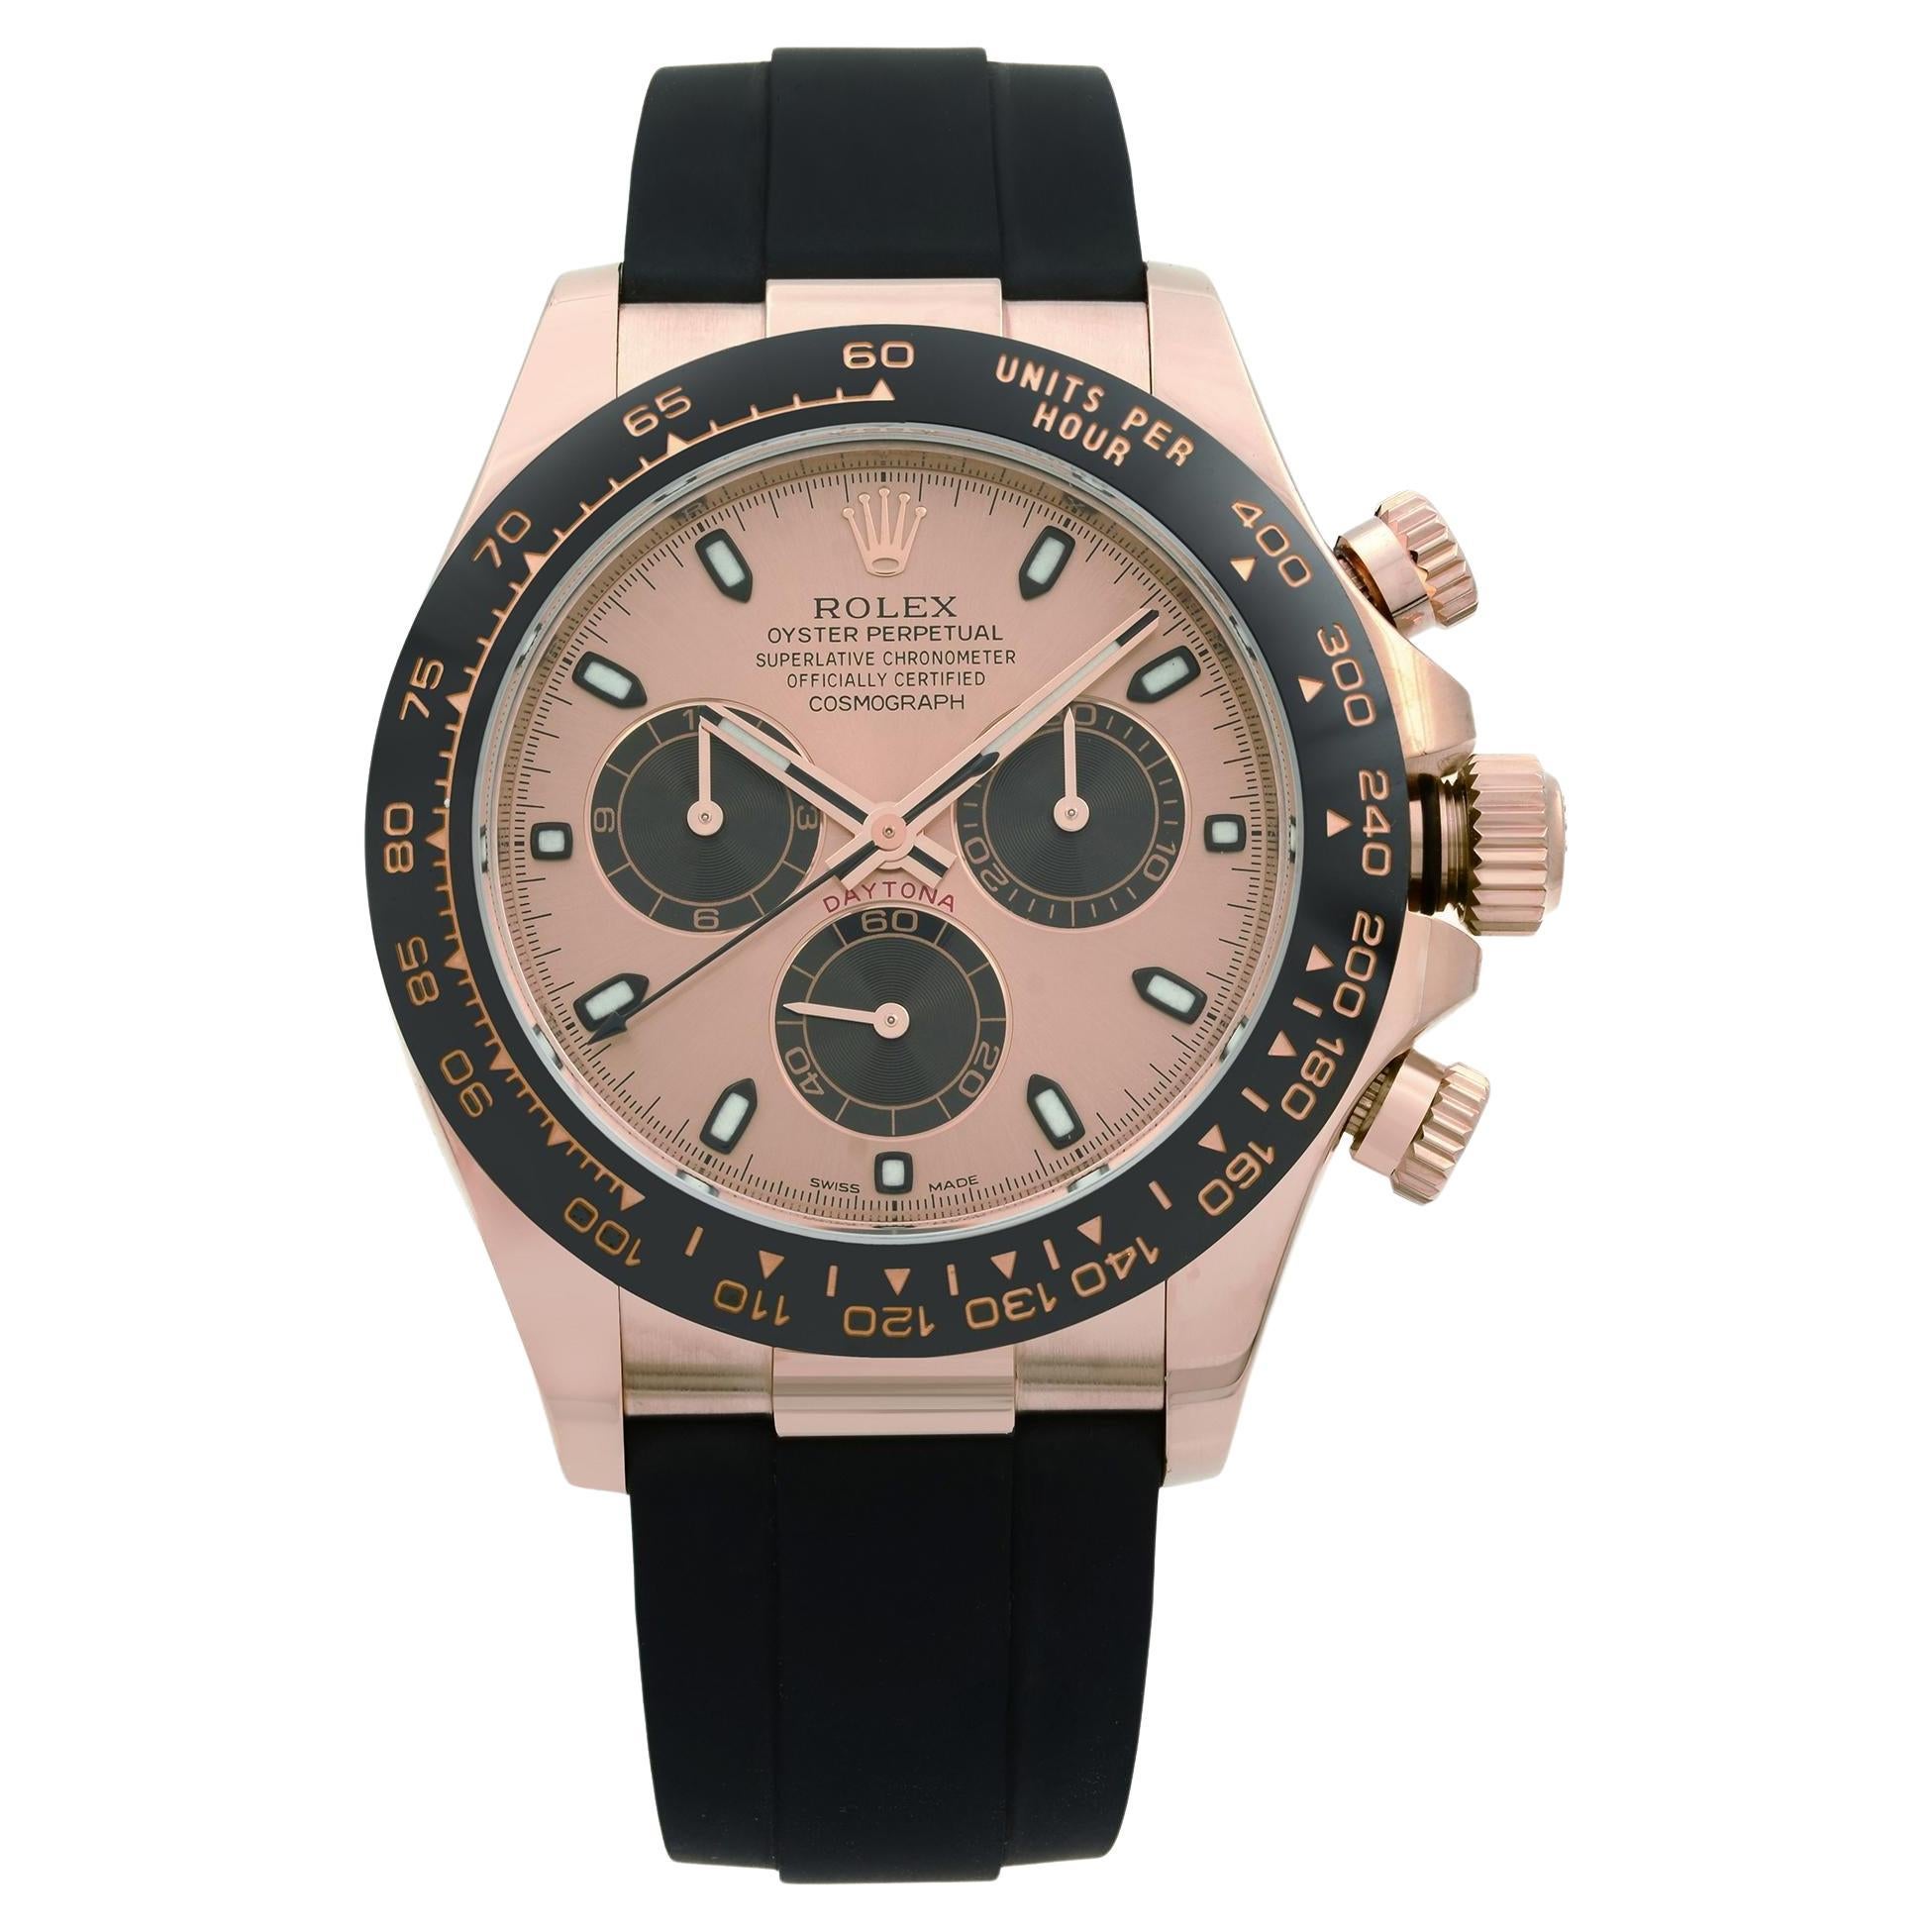 Rolex Cosmograph Daytona 18k Rose Gold Pink Dial Mens Watch 116515LN For Sale